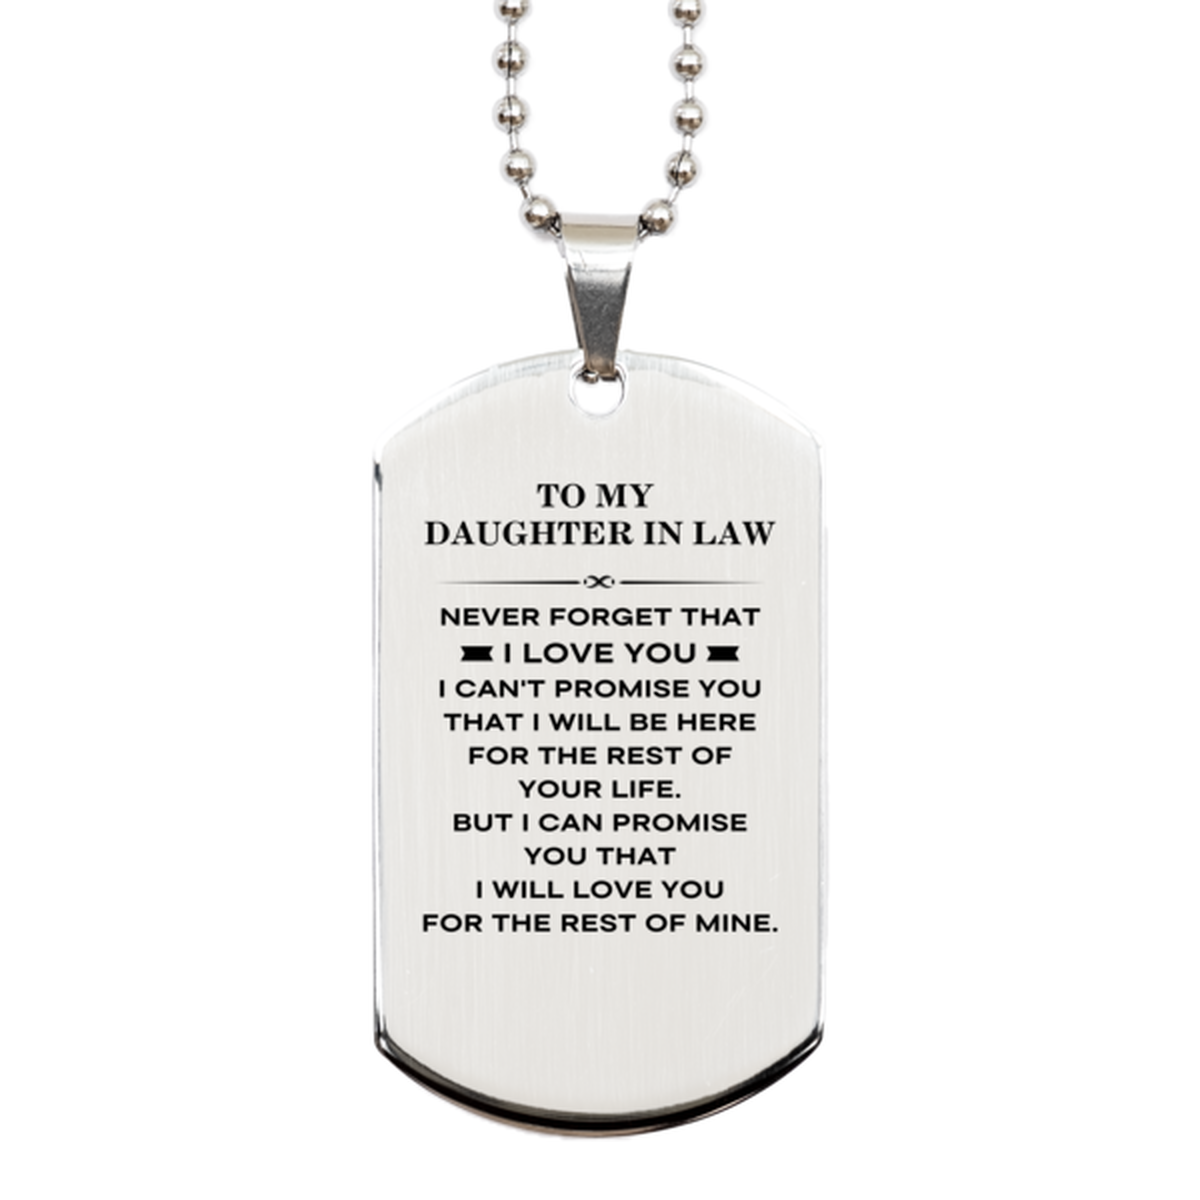 To My Daughter In Law Gifts, I will love you for the rest of mine, Love Daughter In Law Dog Tag Necklace, Birthday Christmas Unique Silver Dog Tag For Daughter In Law